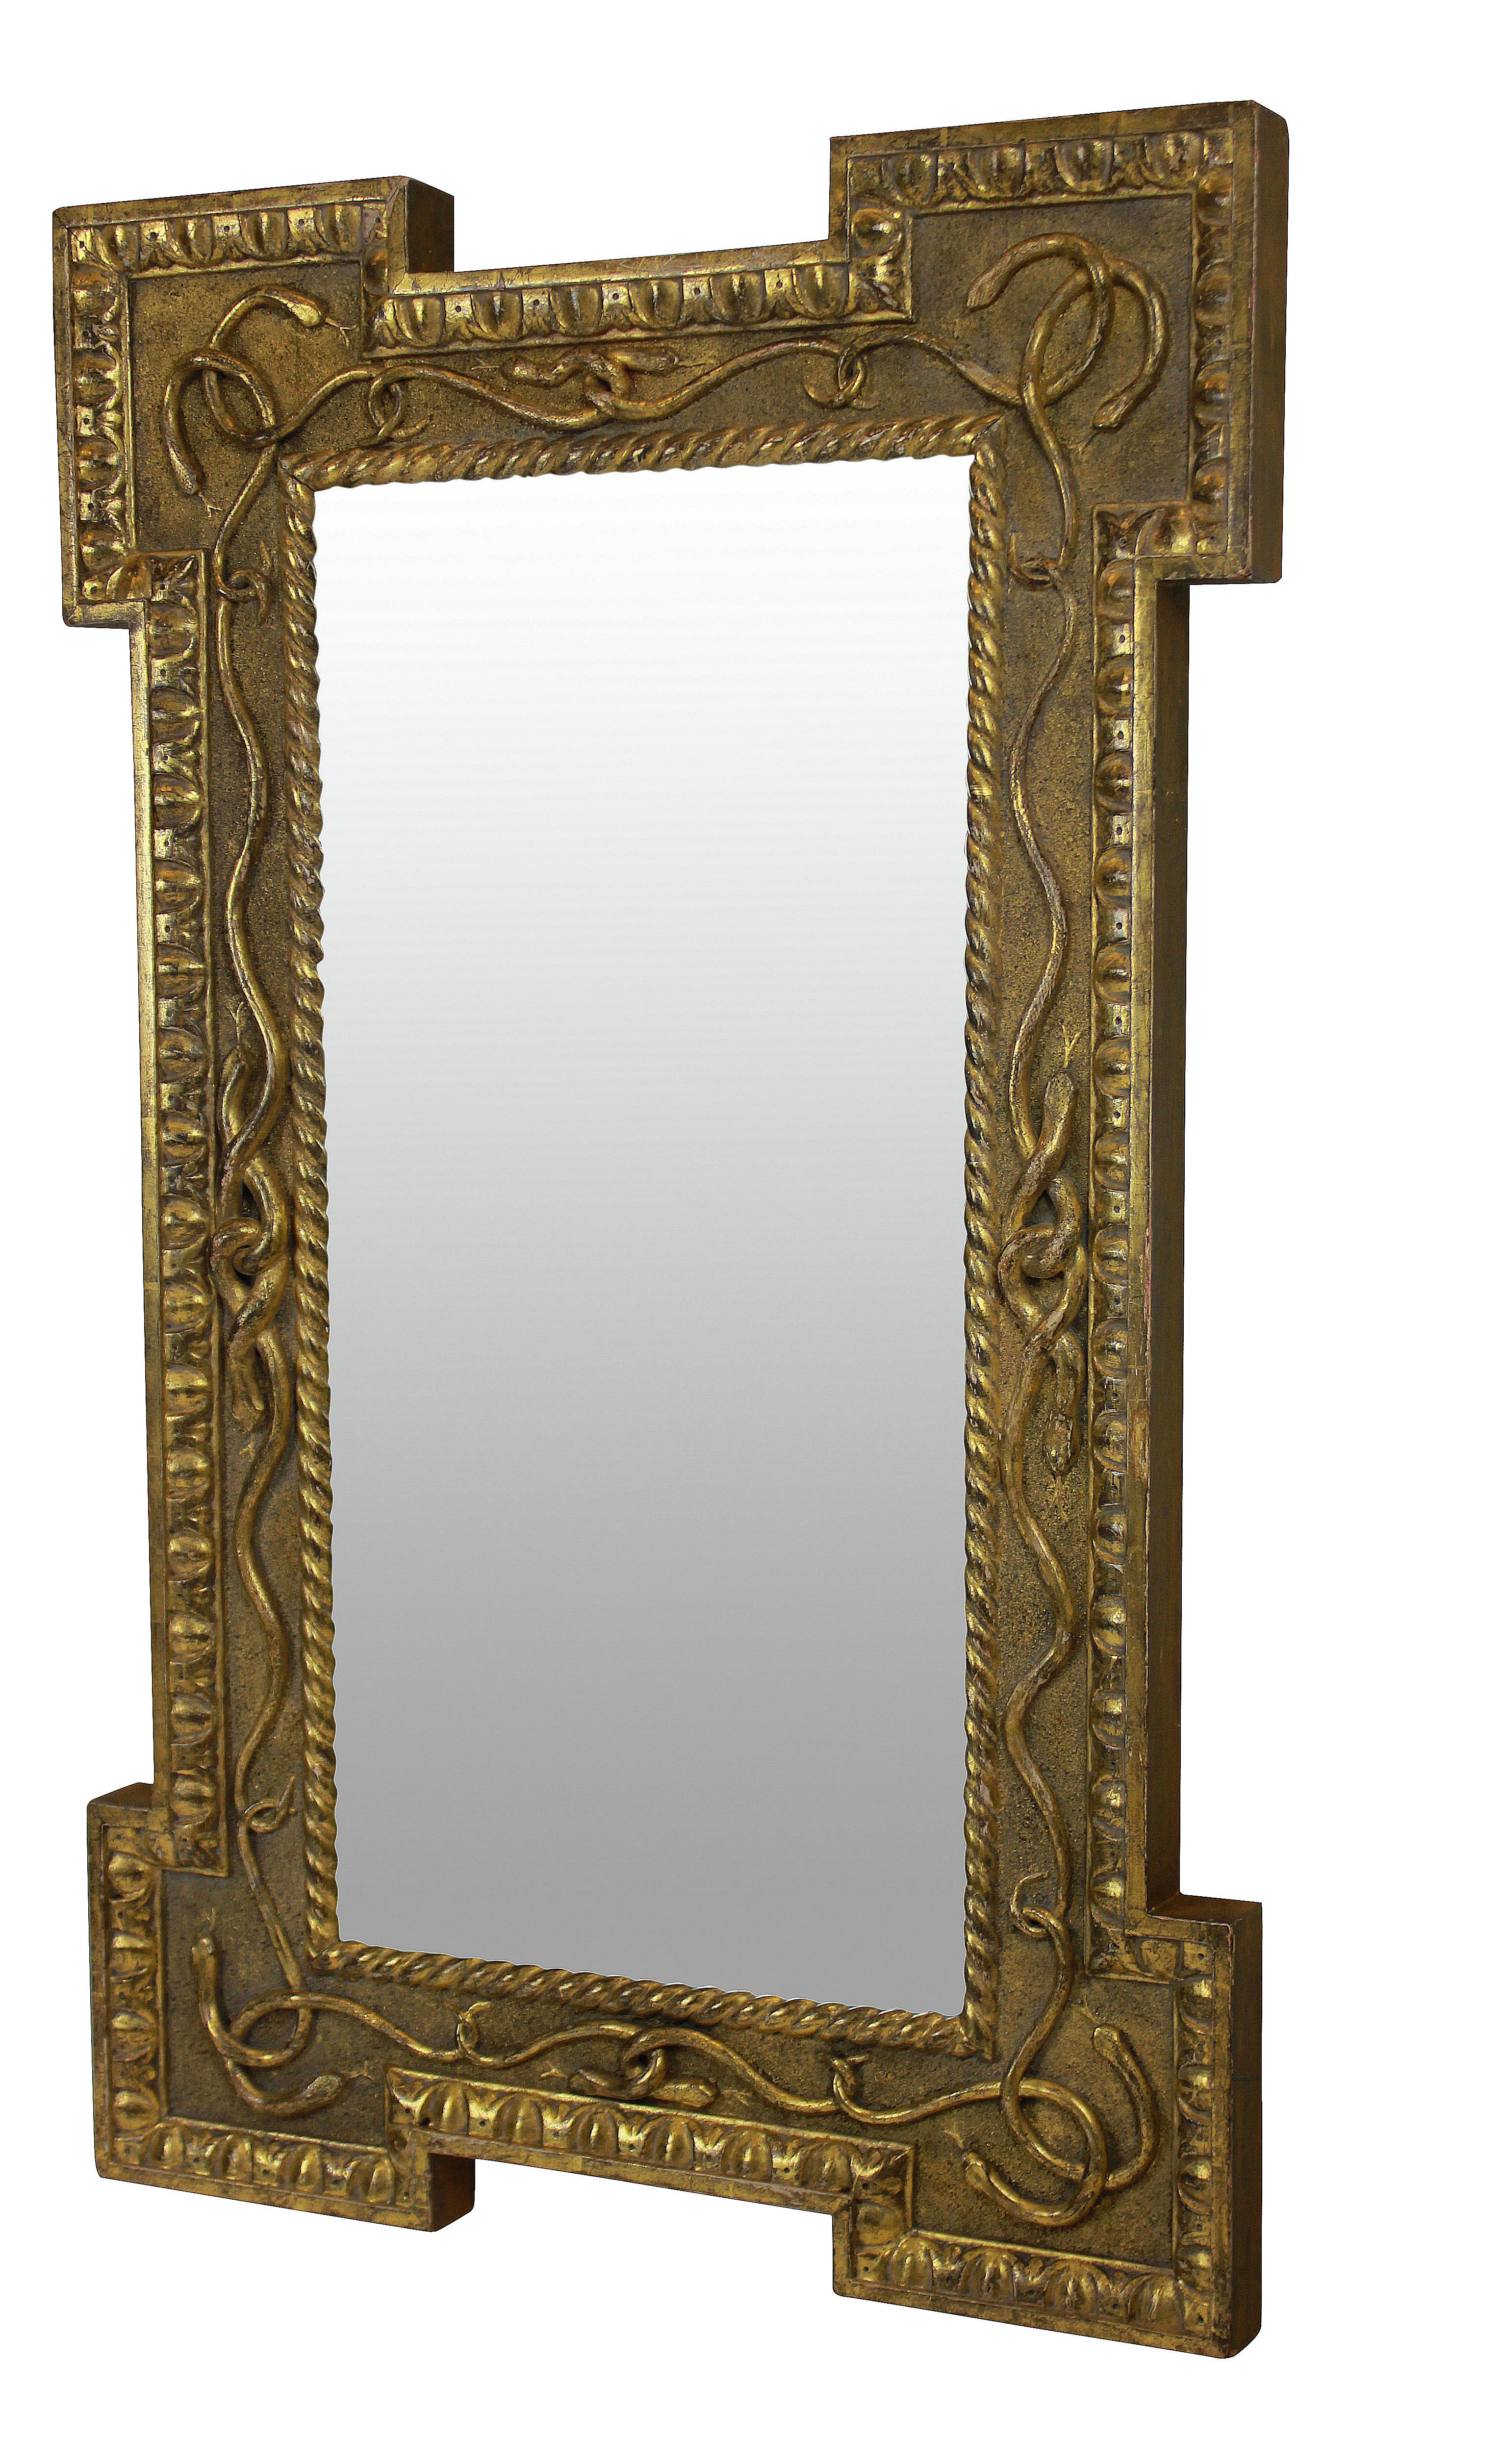 Early 19th Century Regency Giltwood Mirror with Serpent Decoration